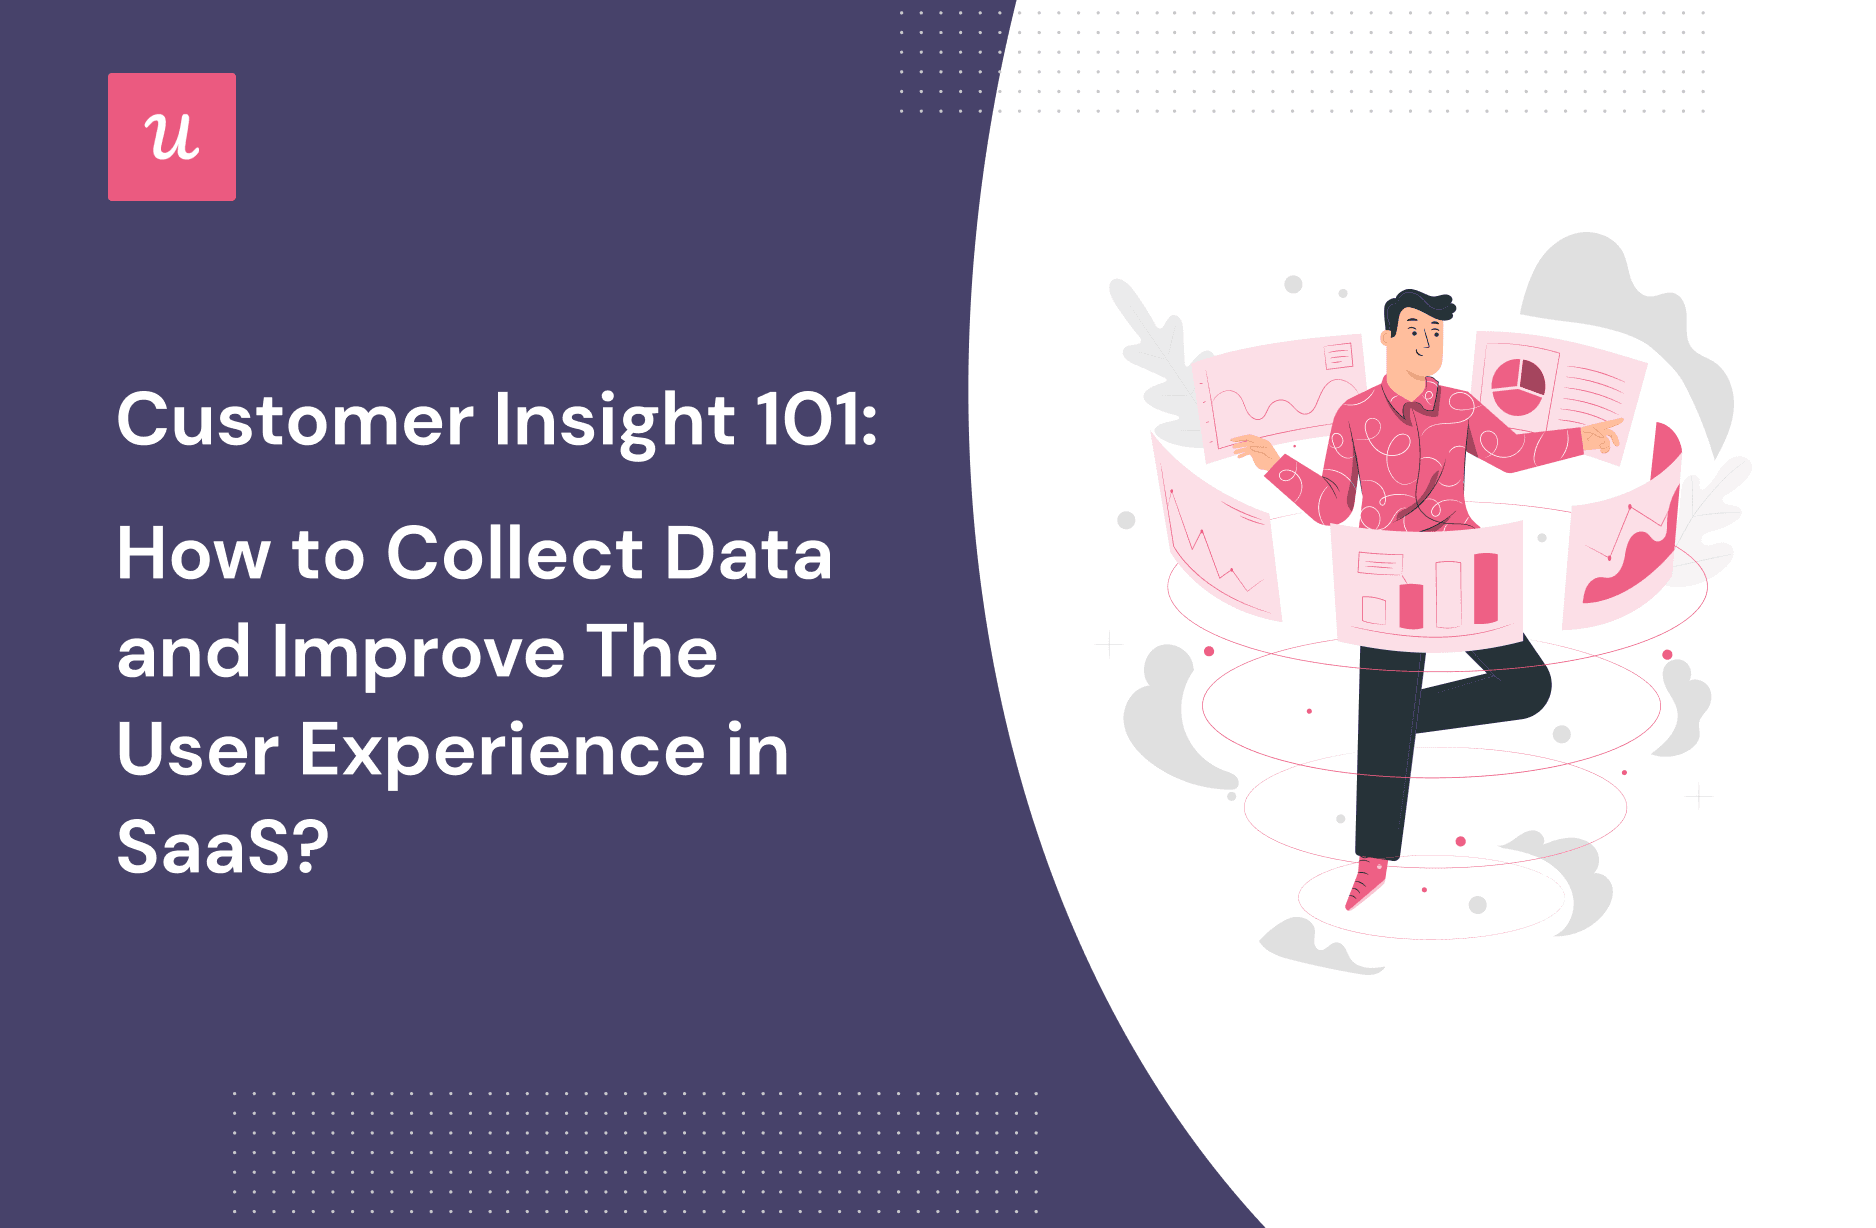 Customer Insight 101: How To Collect Data and Improve the User Experience in SaaS? cover